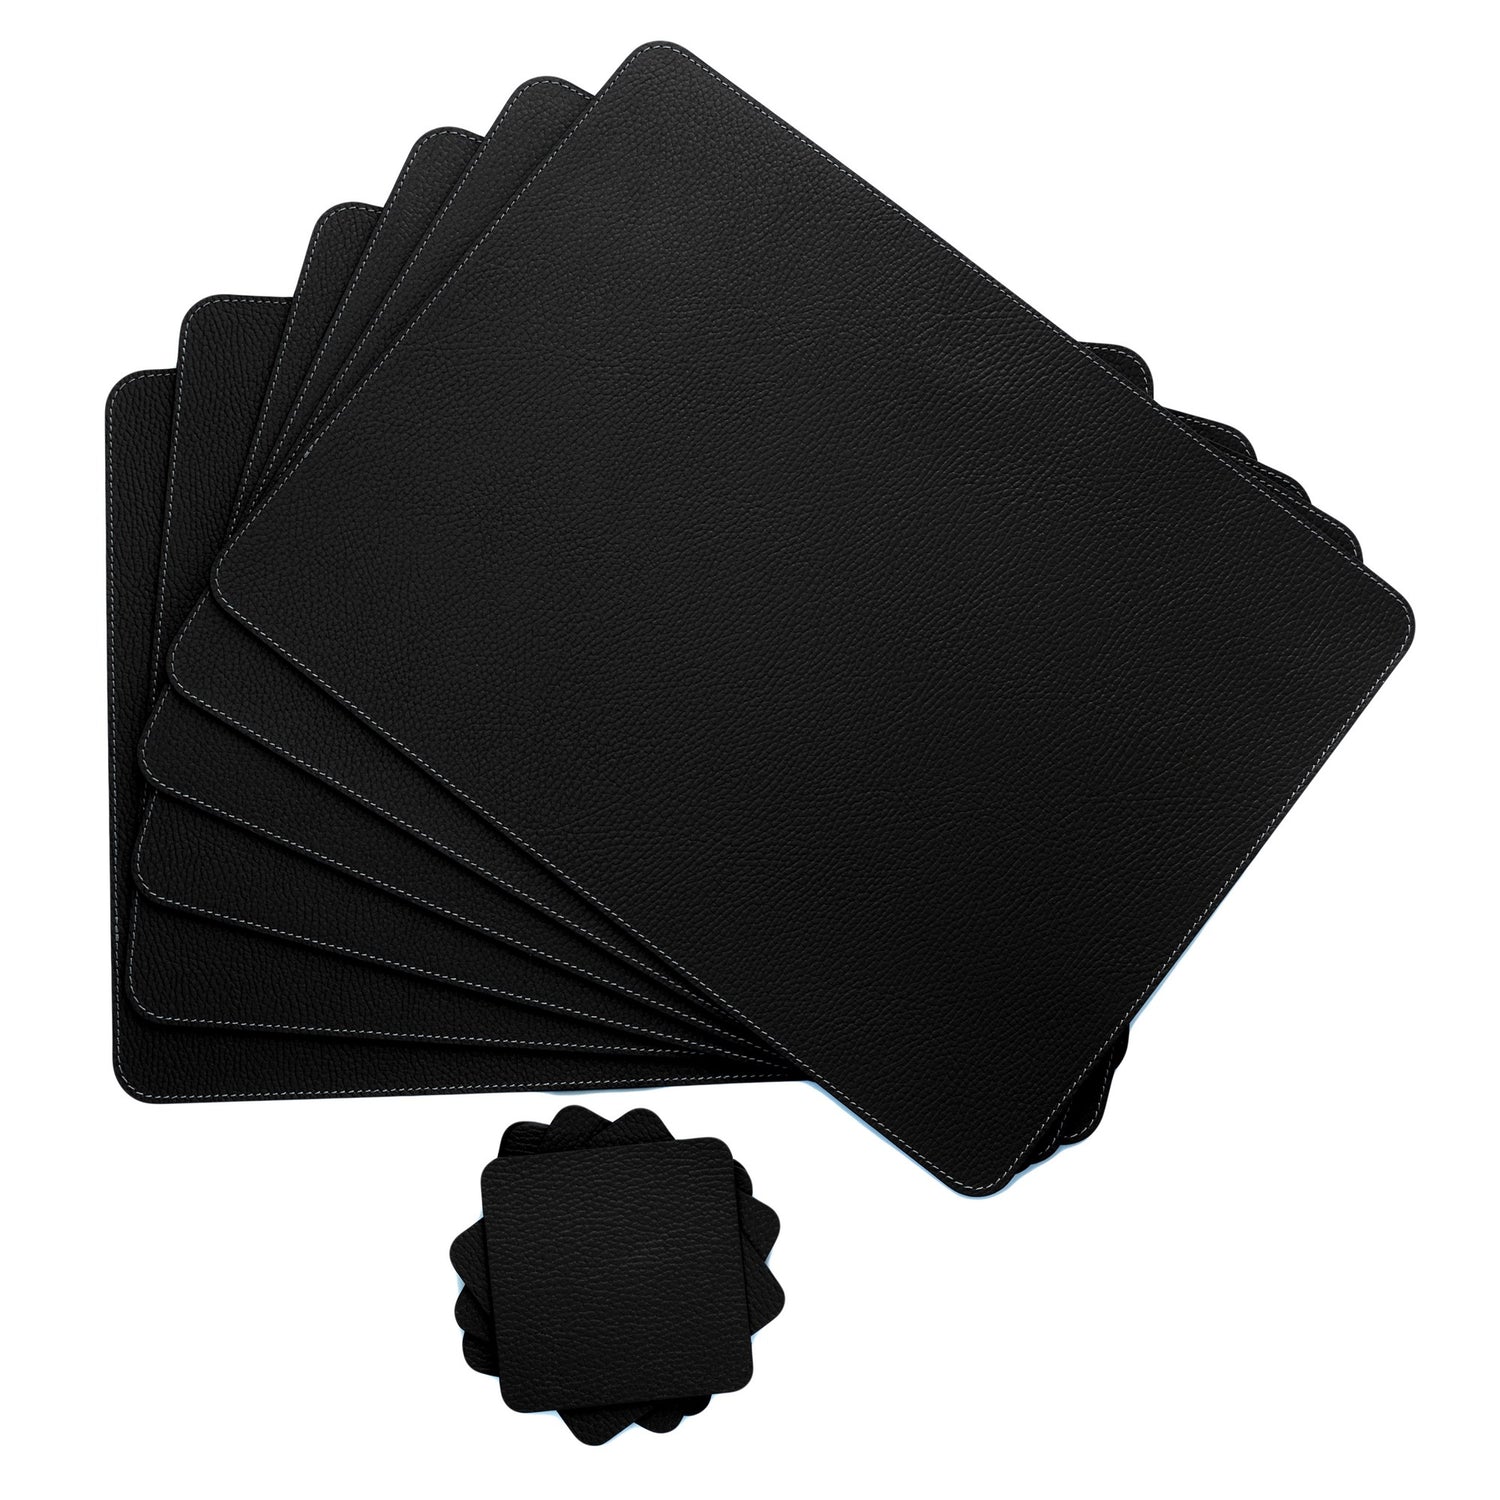 Placemats for Home Black 40x30